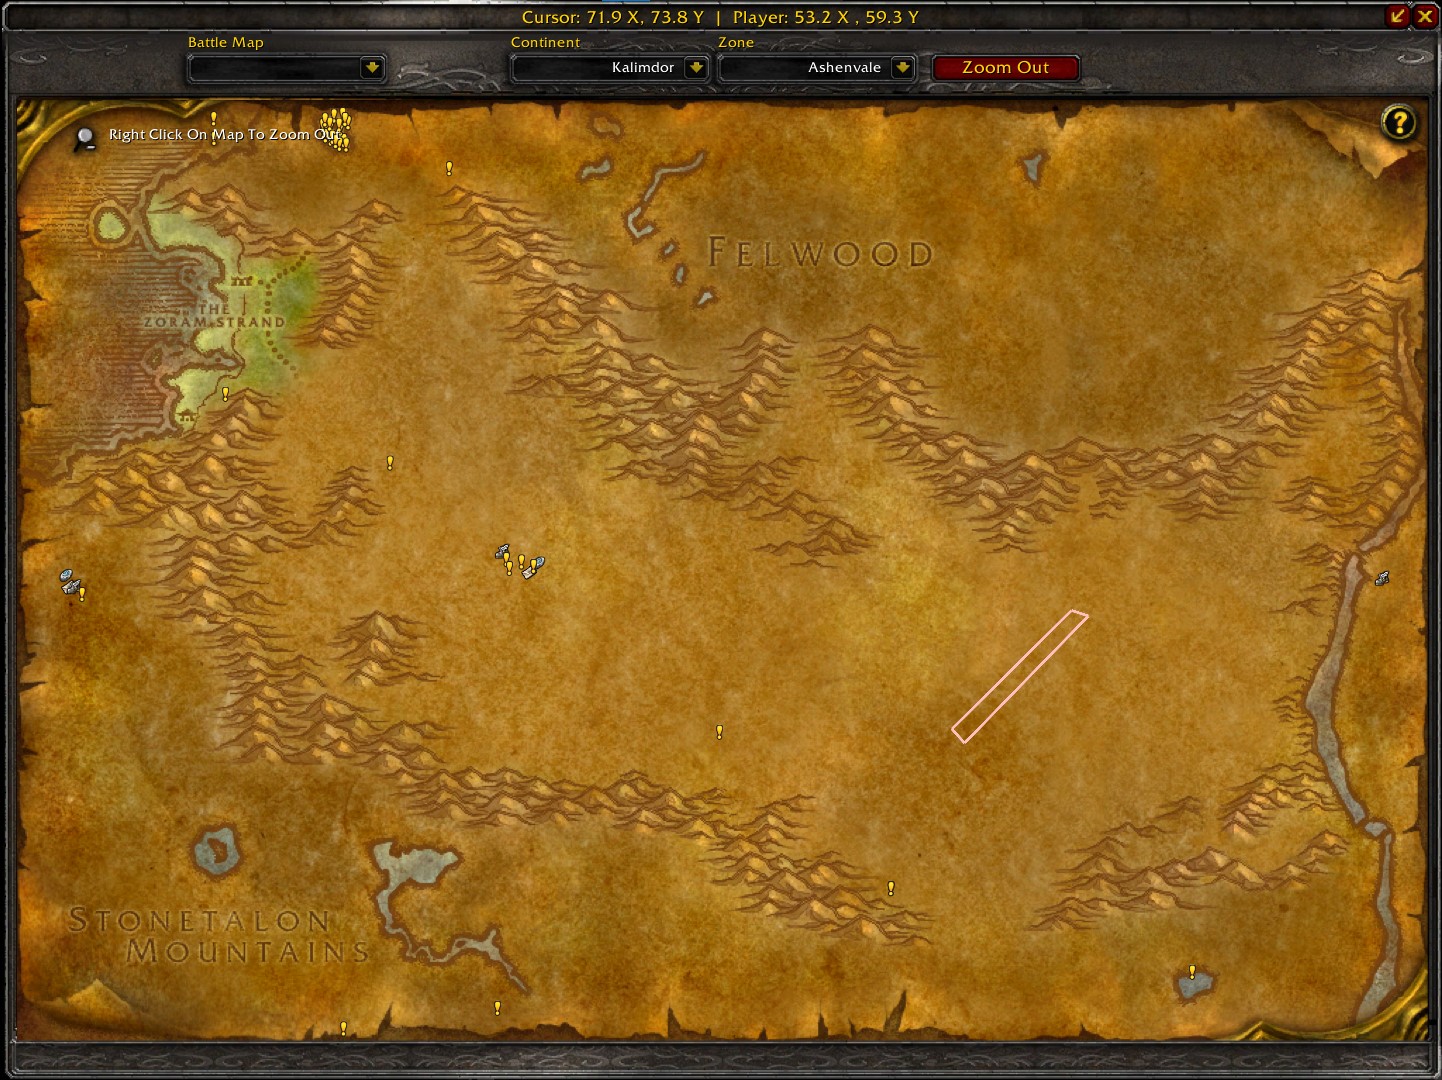 A map of World of Warcraft showing a route for heavy leather farming in Thousand Needles. The route starts at the flight point in Razor Hill and loops around the zone, passing through various areas with high concentrations of mobs that drop heavy leather, such as the Razorfen Downs and the Mirage Raceway.